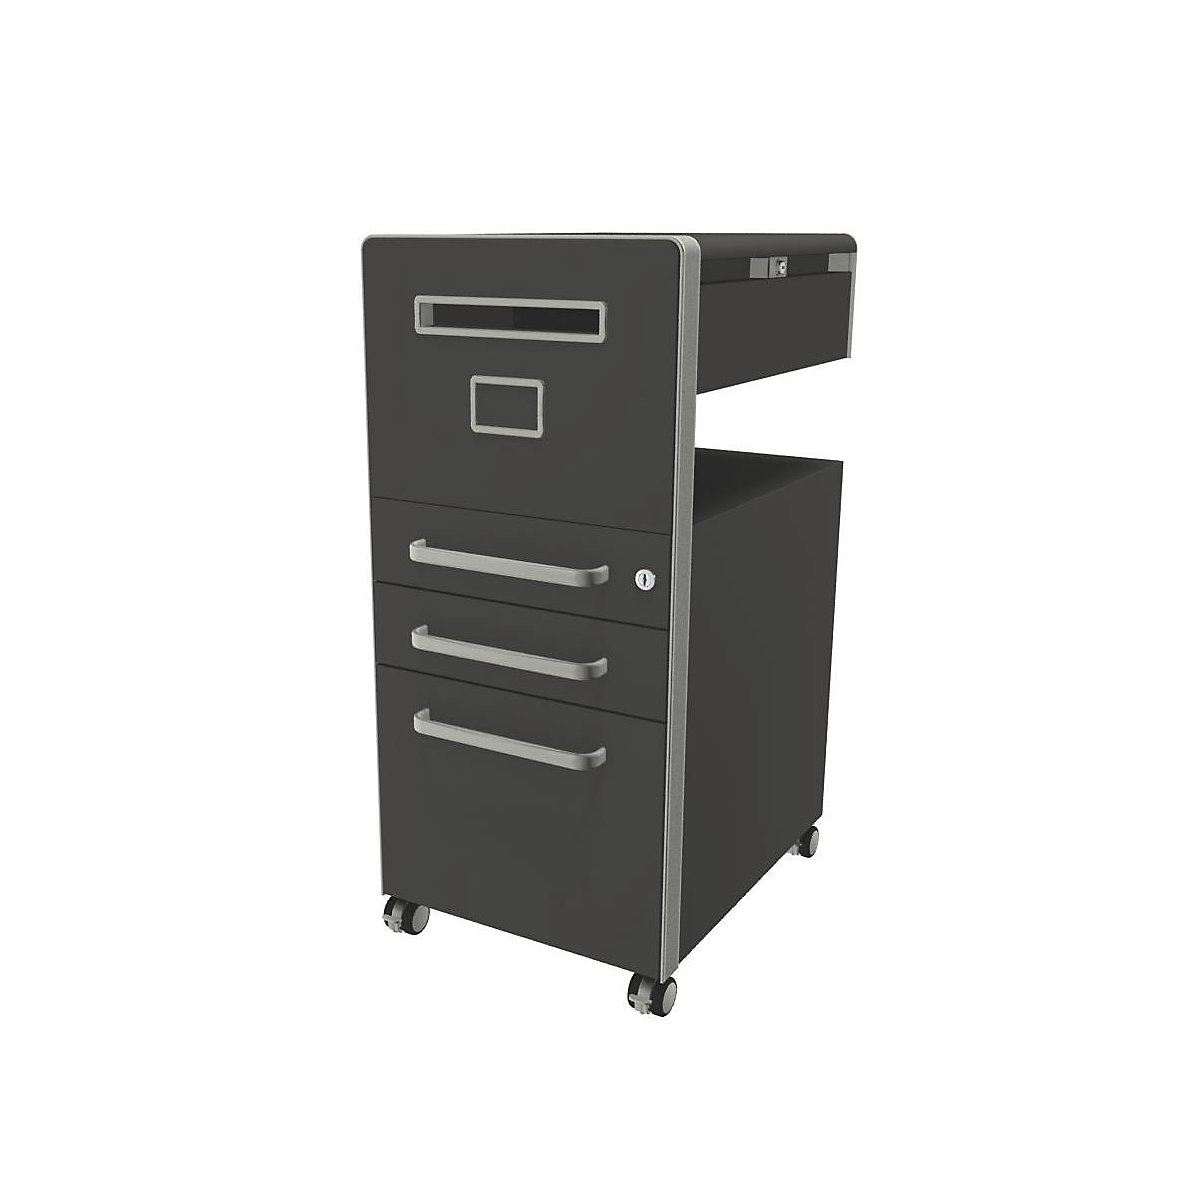 Bite™ pedestal furniture, with 1 whiteboard, opens on the left side – BISLEY, with 2 universal drawers, 1 suspension file drawer, slate-16